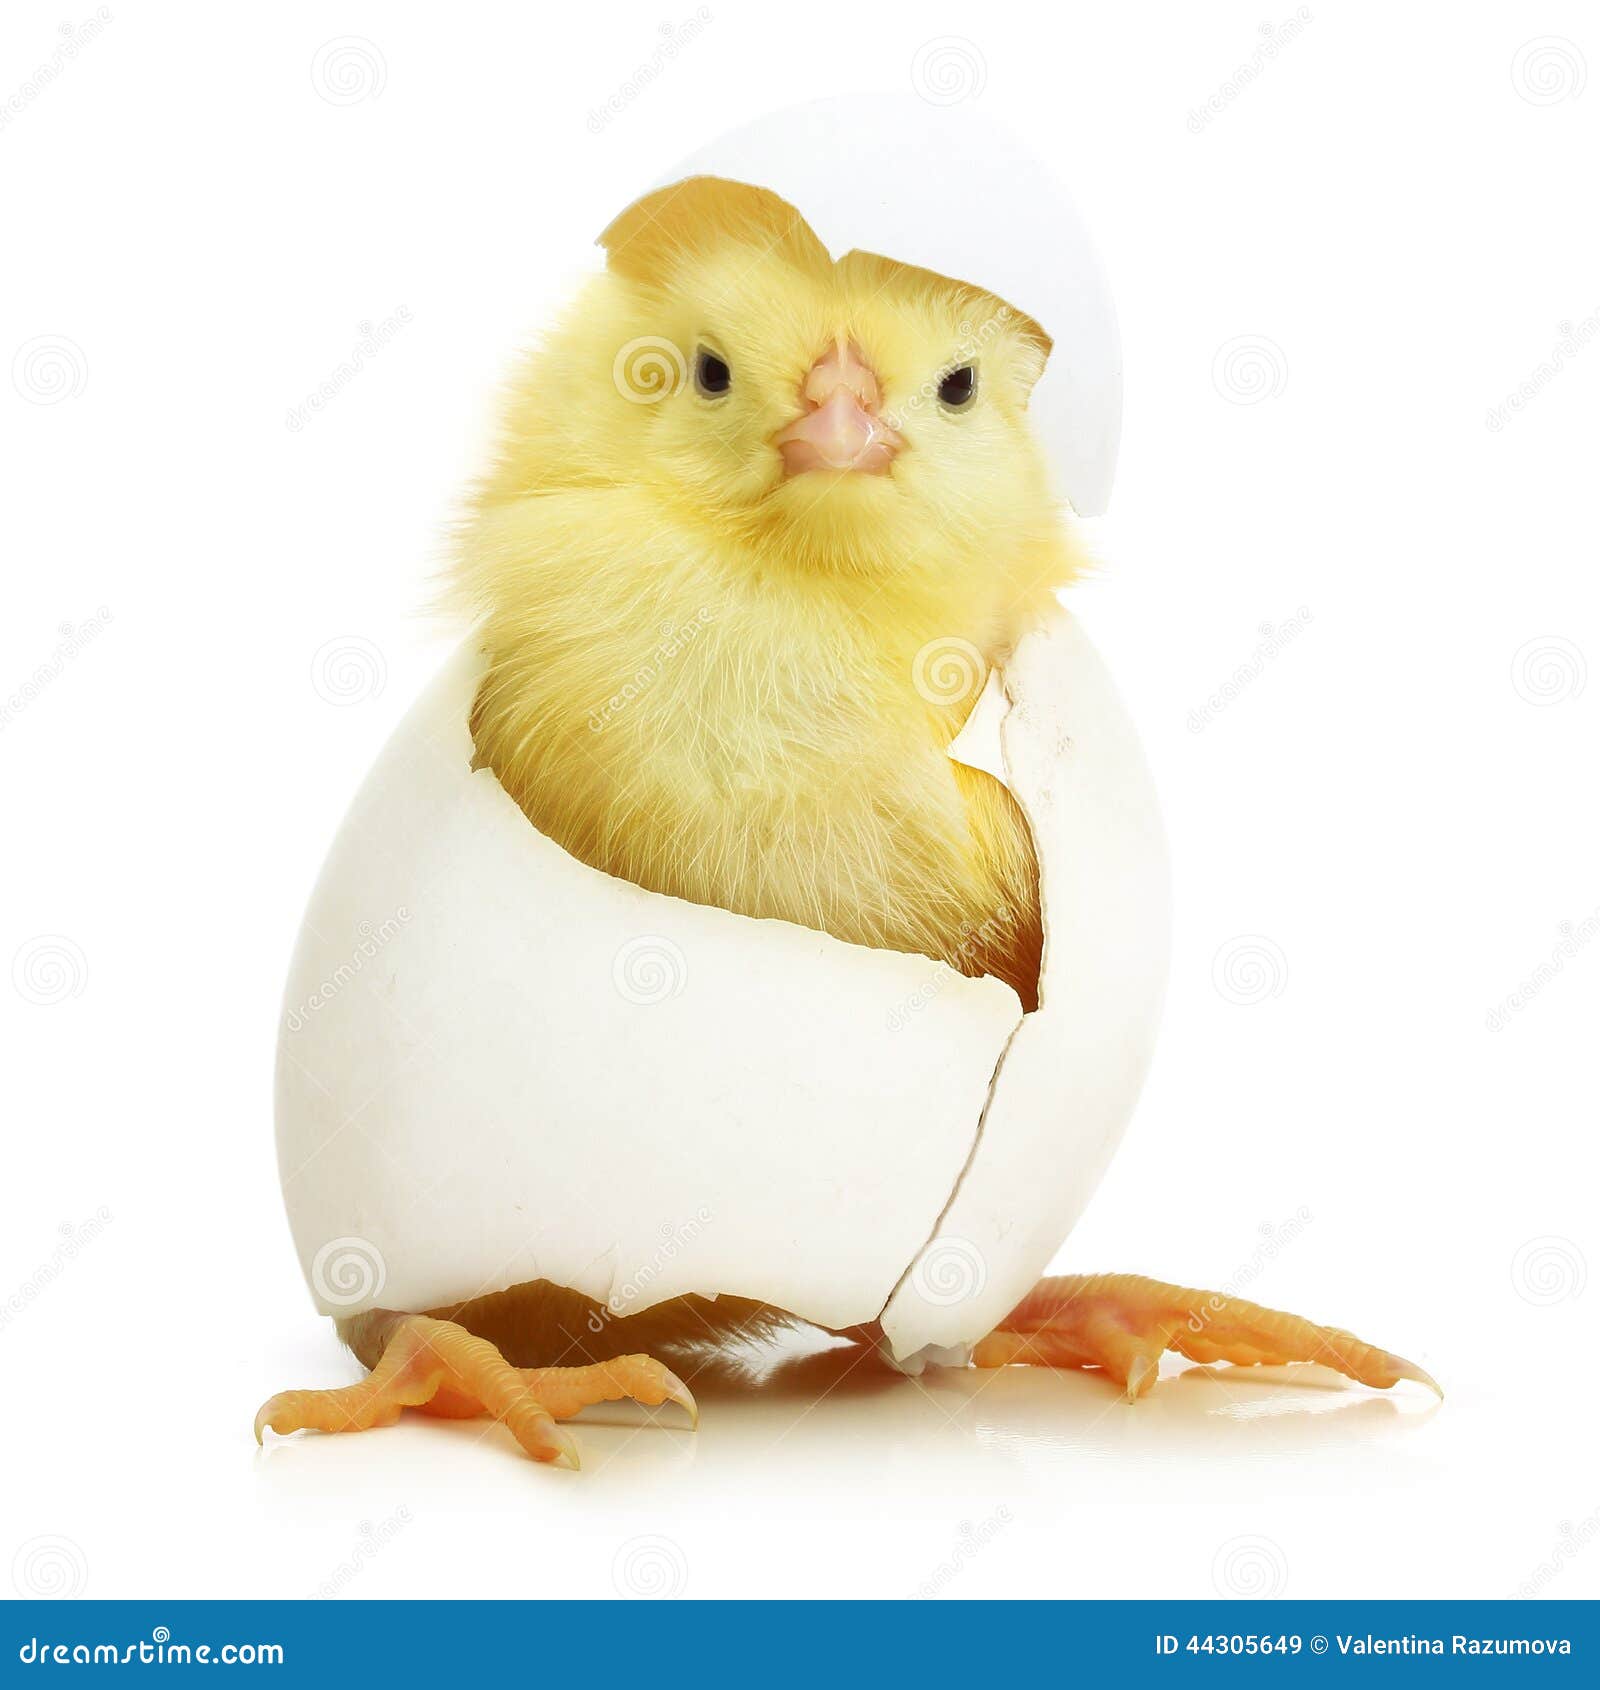 Cute Little Chicken Coming Out Of A White Egg Stock Image Image Of Cute Adorable 44305649